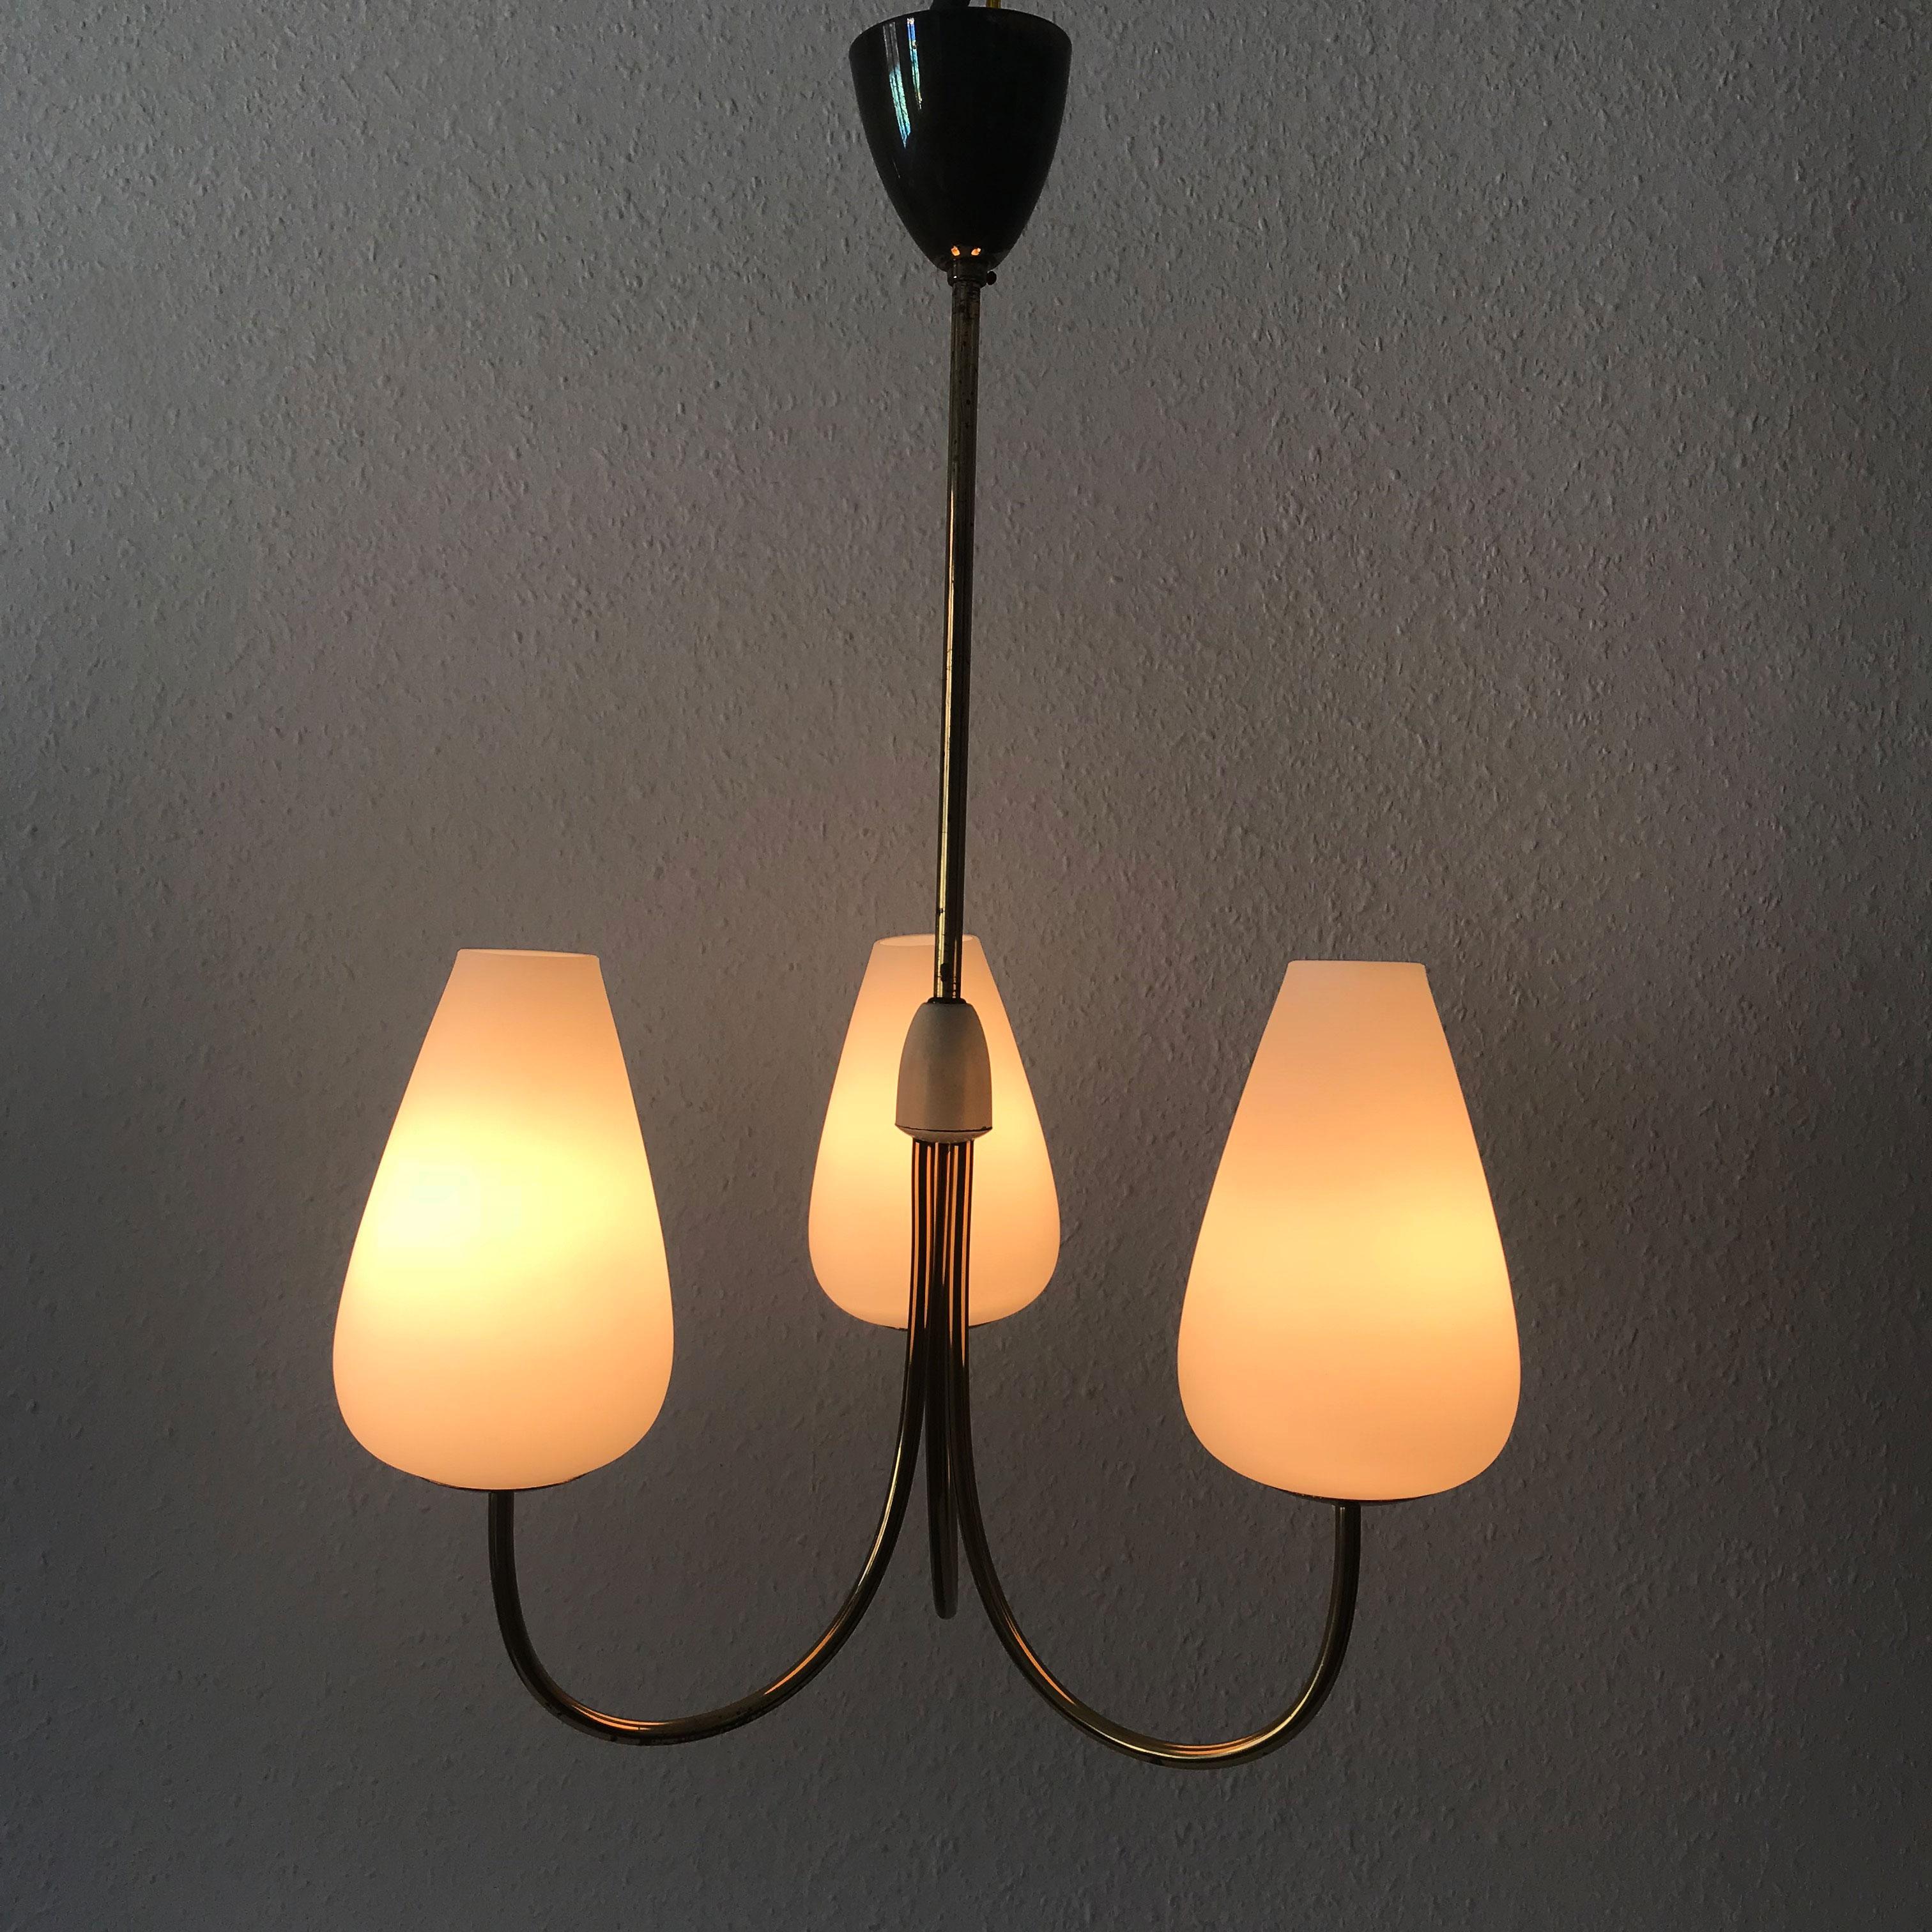 Elegant three-armed Mid-Century Modern chandelier or pendant lamp. Probably manufactured by Kaiser Leuchten, 1950s, Germany.

Executed in brass and opaline glass. The lamp needs three E14 Edison screw fit bulb, is re-wired and in working